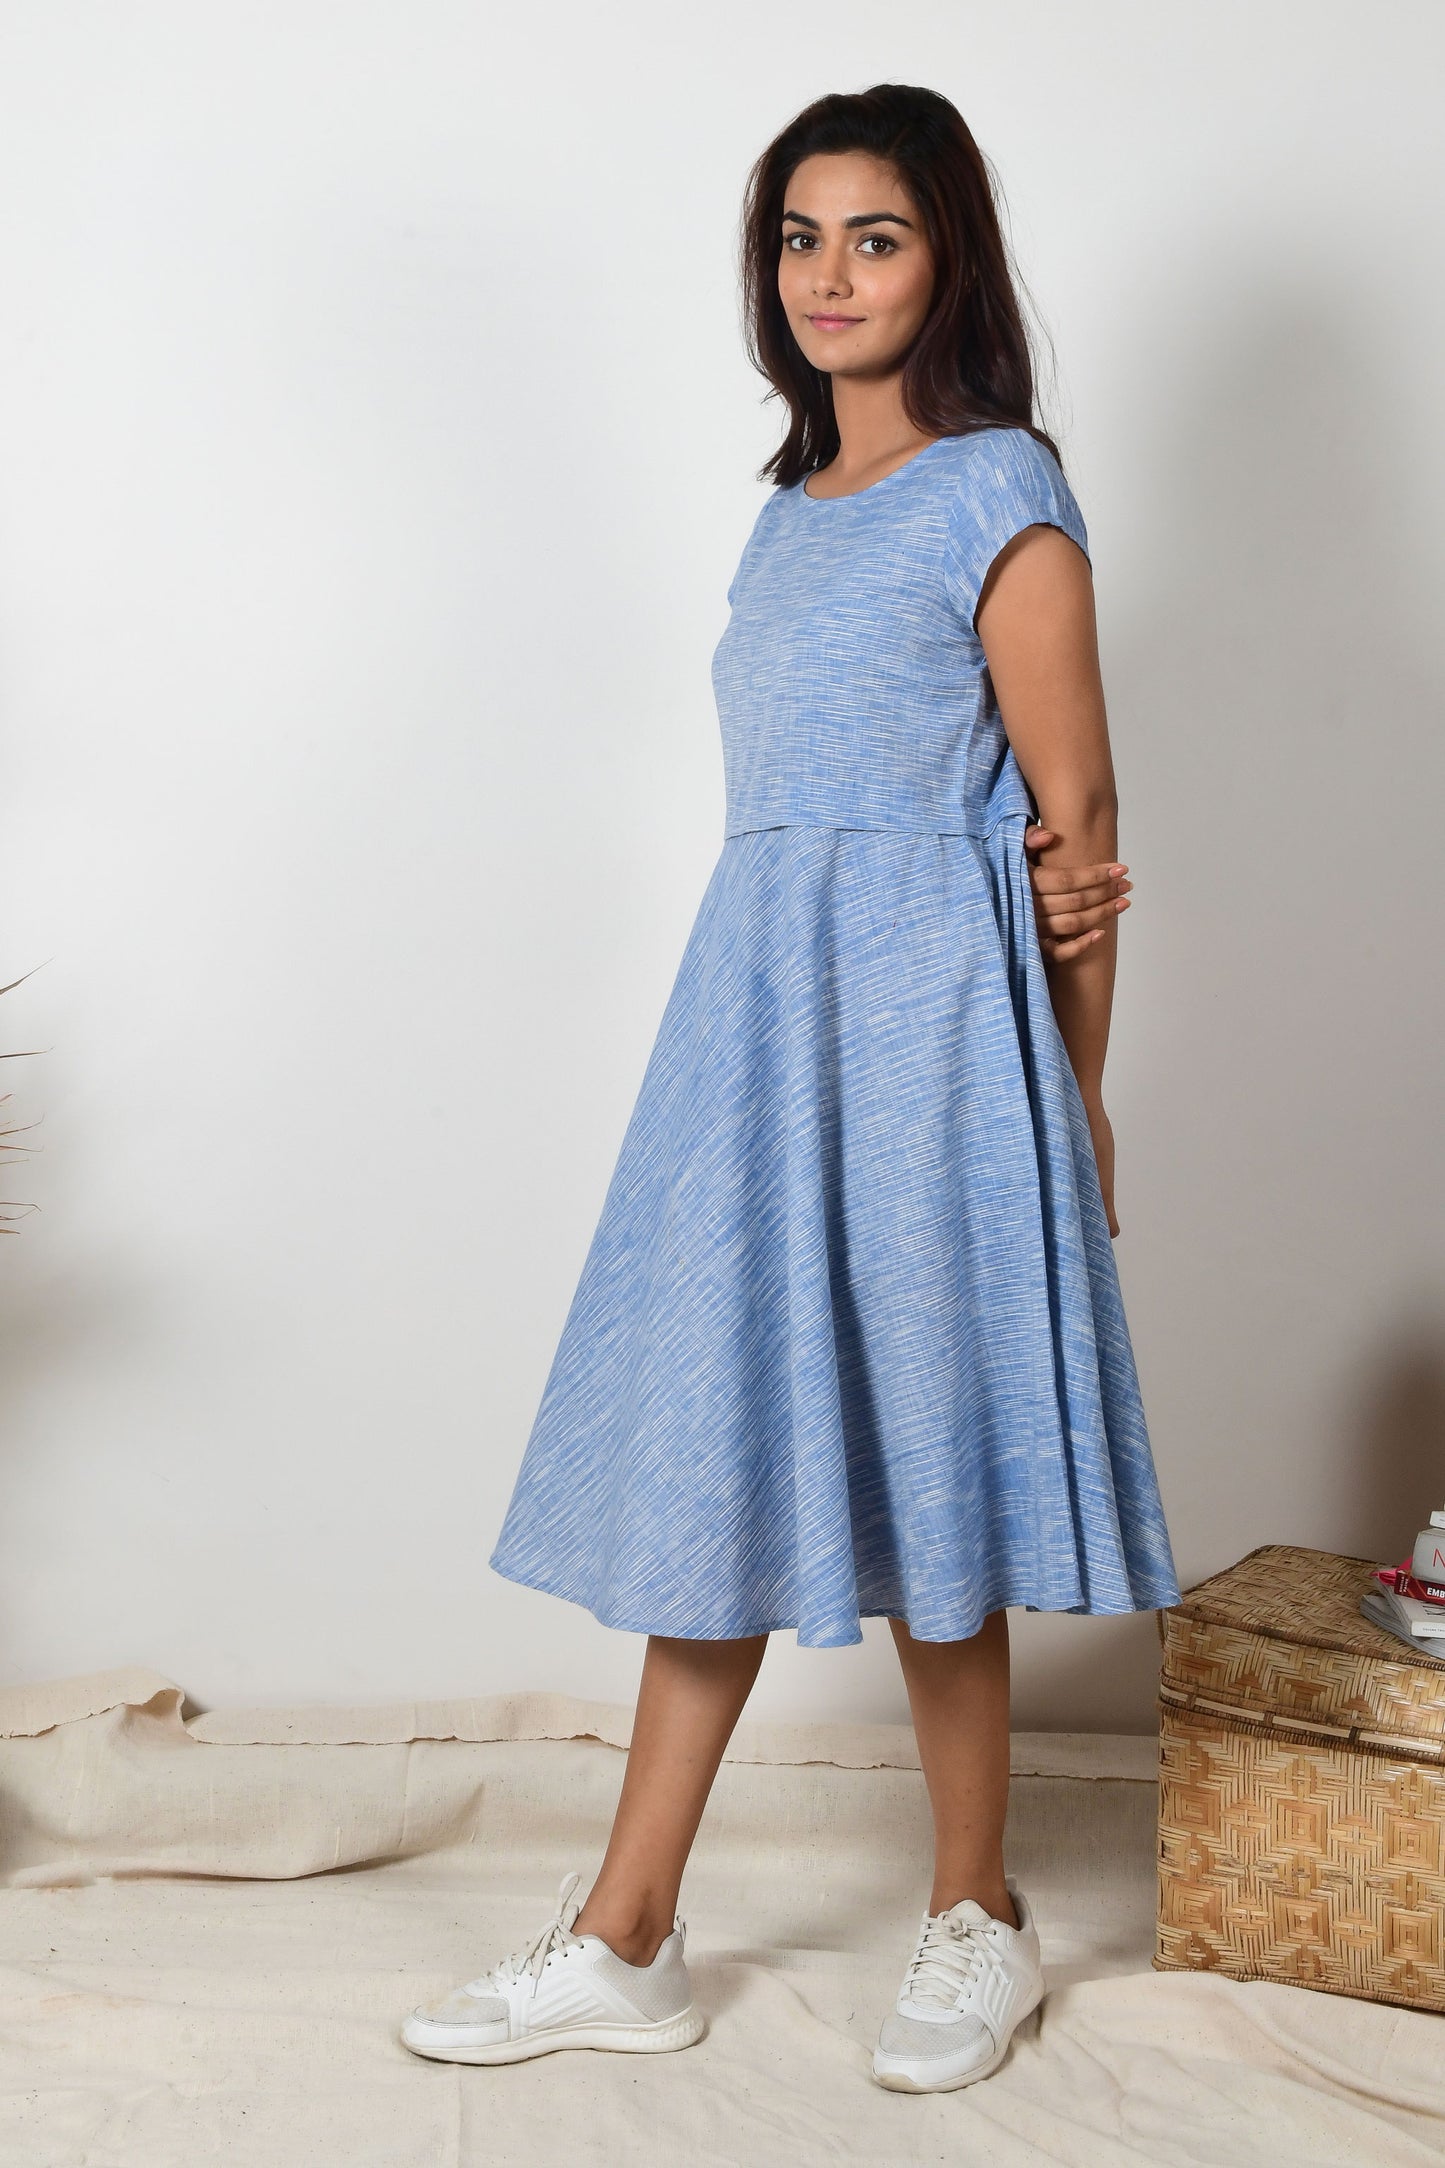 Indian girl with black hair and white sneakers wearing a blue a-line dress made with cotton that hand spun and hand woven giving a side pose as a model.